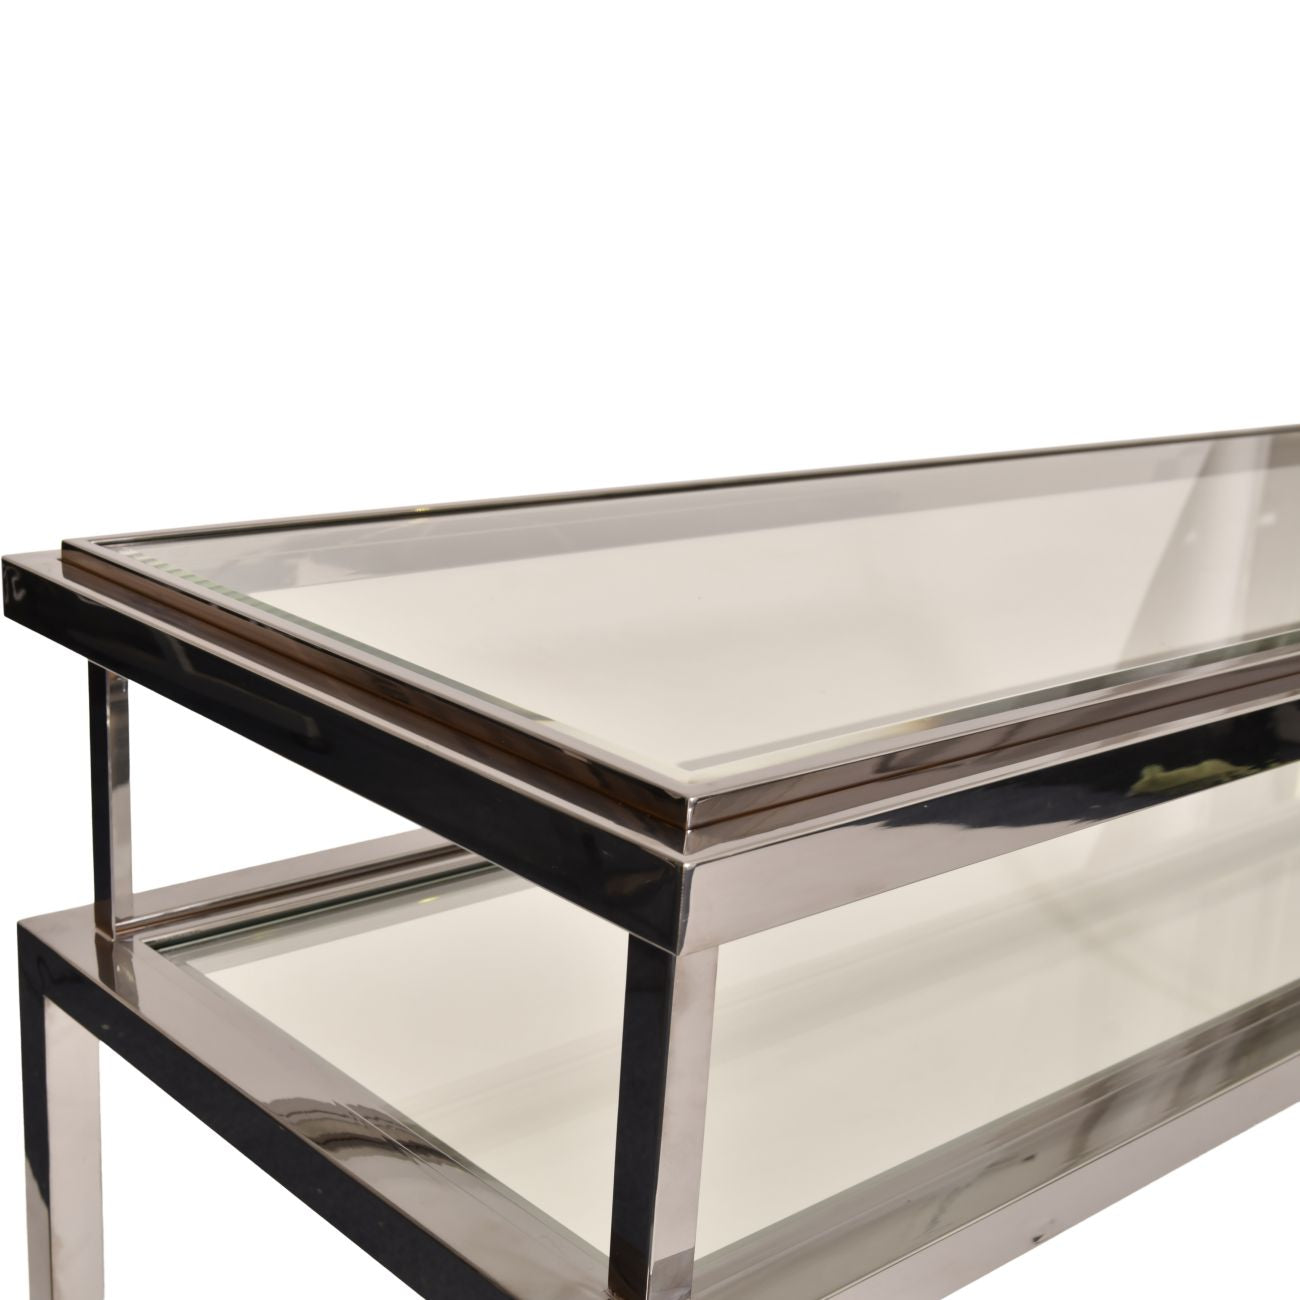 Knightsbridge Stainless Steel and Glass  Console Table 160x45x76cm